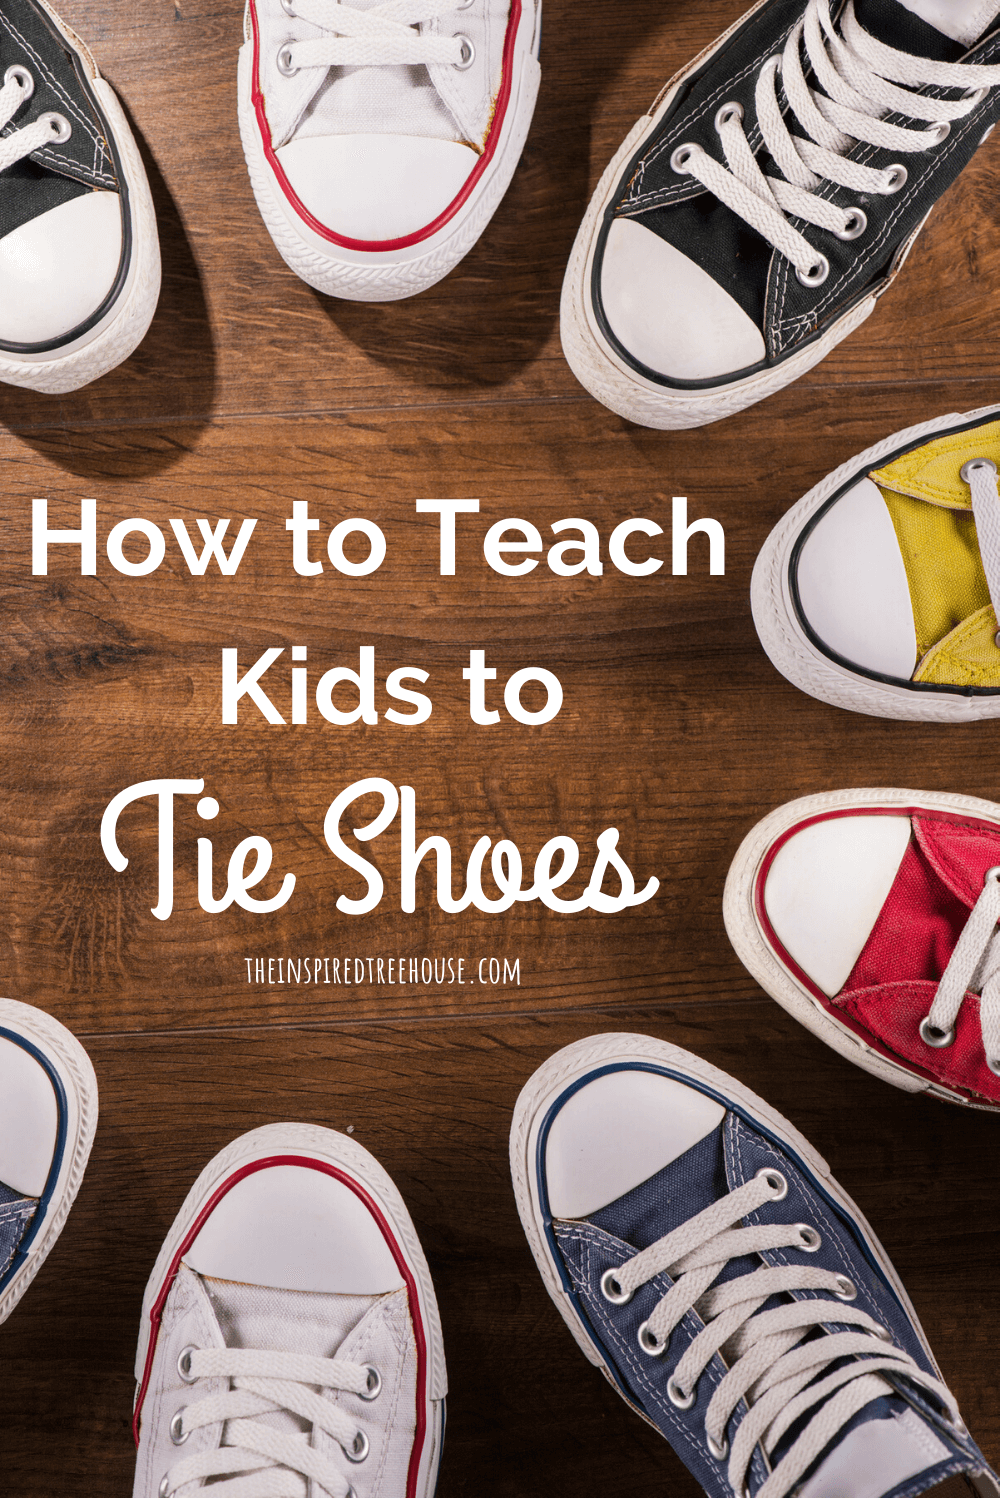 How to Teach Kids to Tie Shoes The Inspired Treehouse